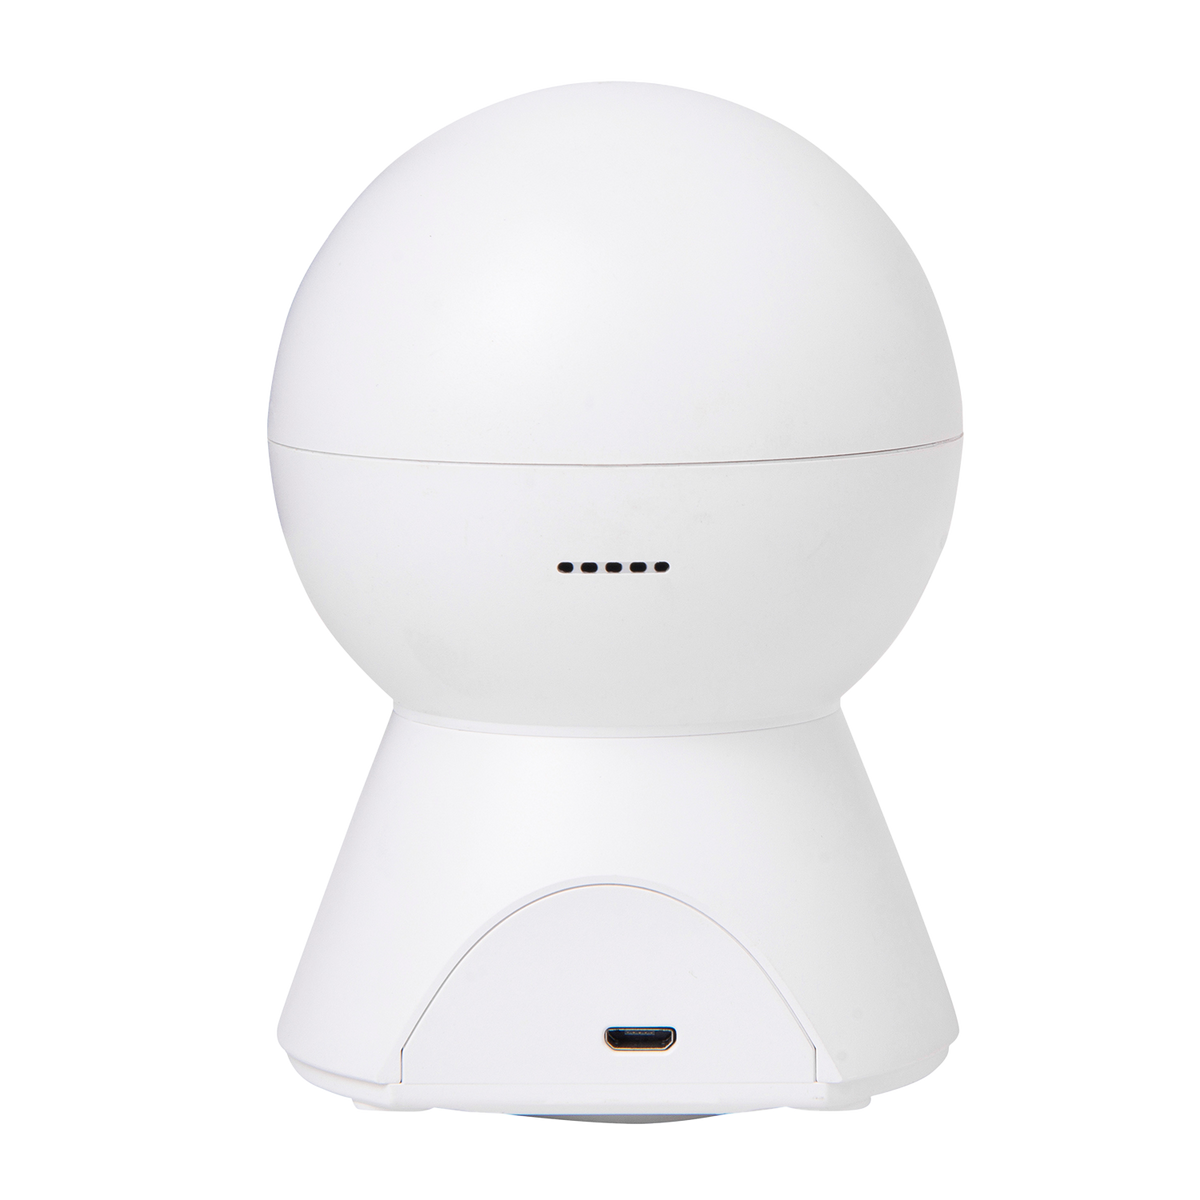 Baybot LIVE360⁰ (Now in 3 Megapixel) - Wireless Wifi camera with 360 degree view